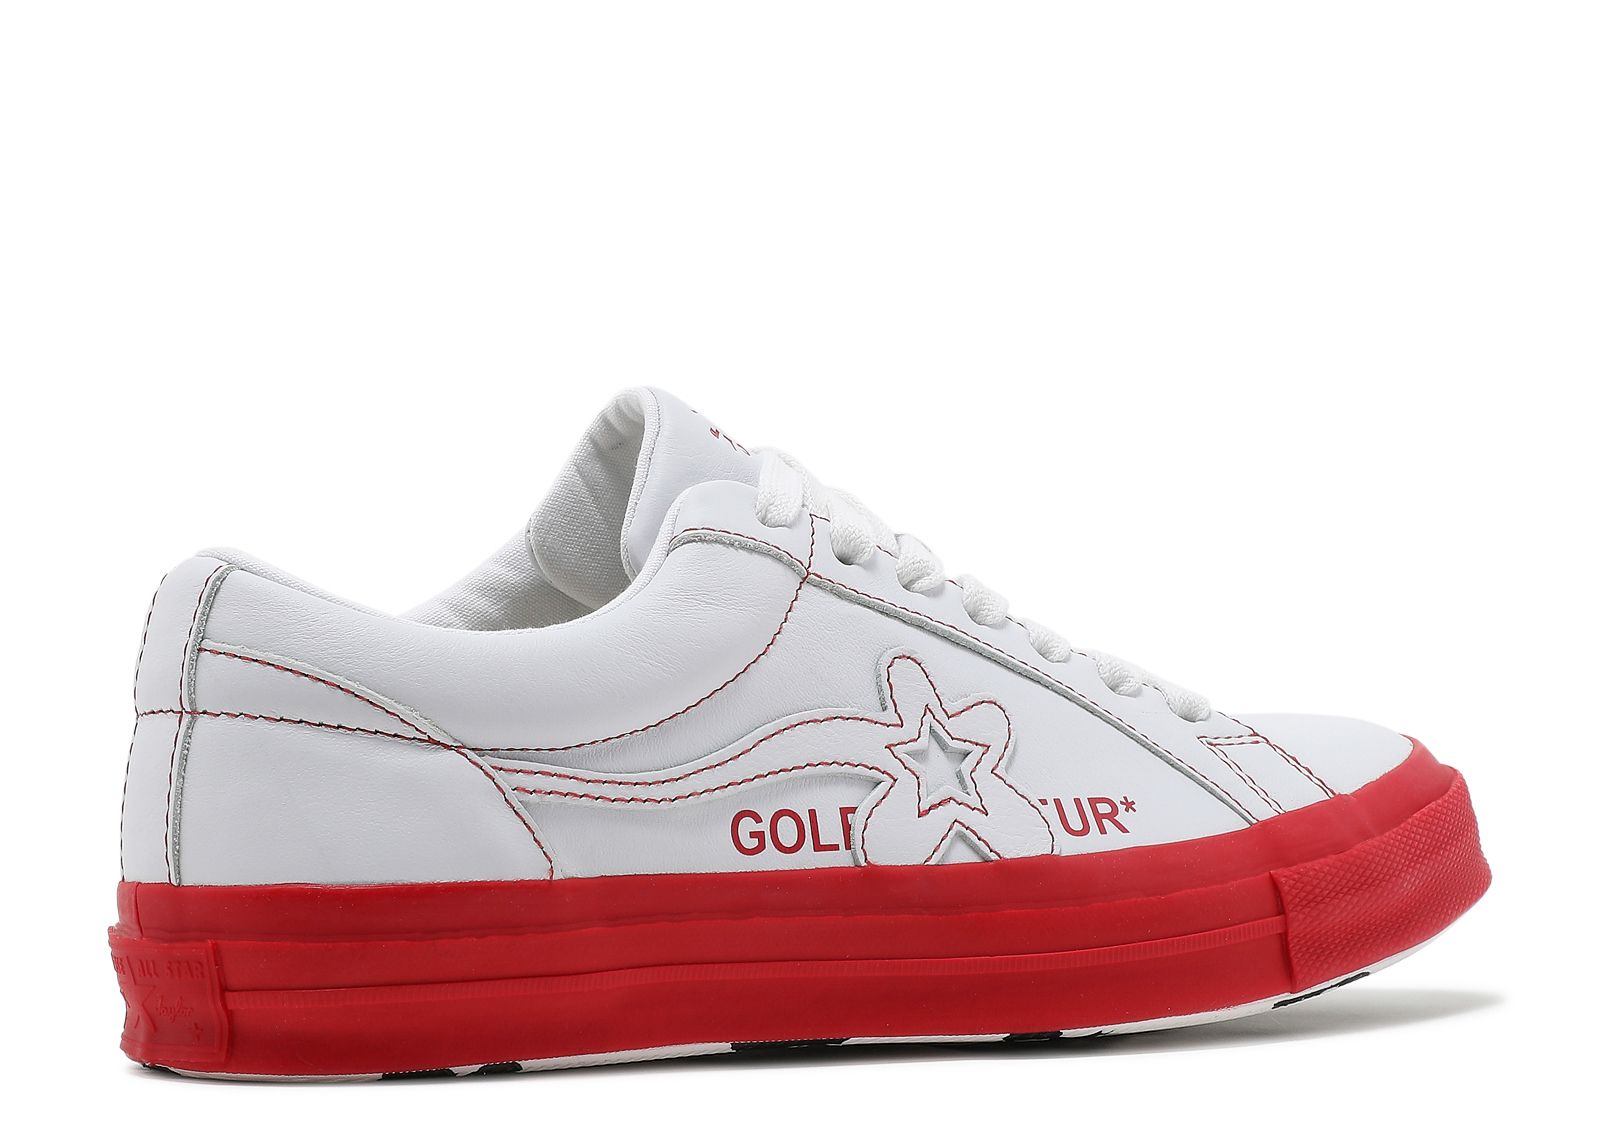 Acquiesce Ritueel samenzwering Golf Le Fleur X One Star Ox 'Racing Red' - Converse - 164026C -  white/antique white/racing red | Flight Club